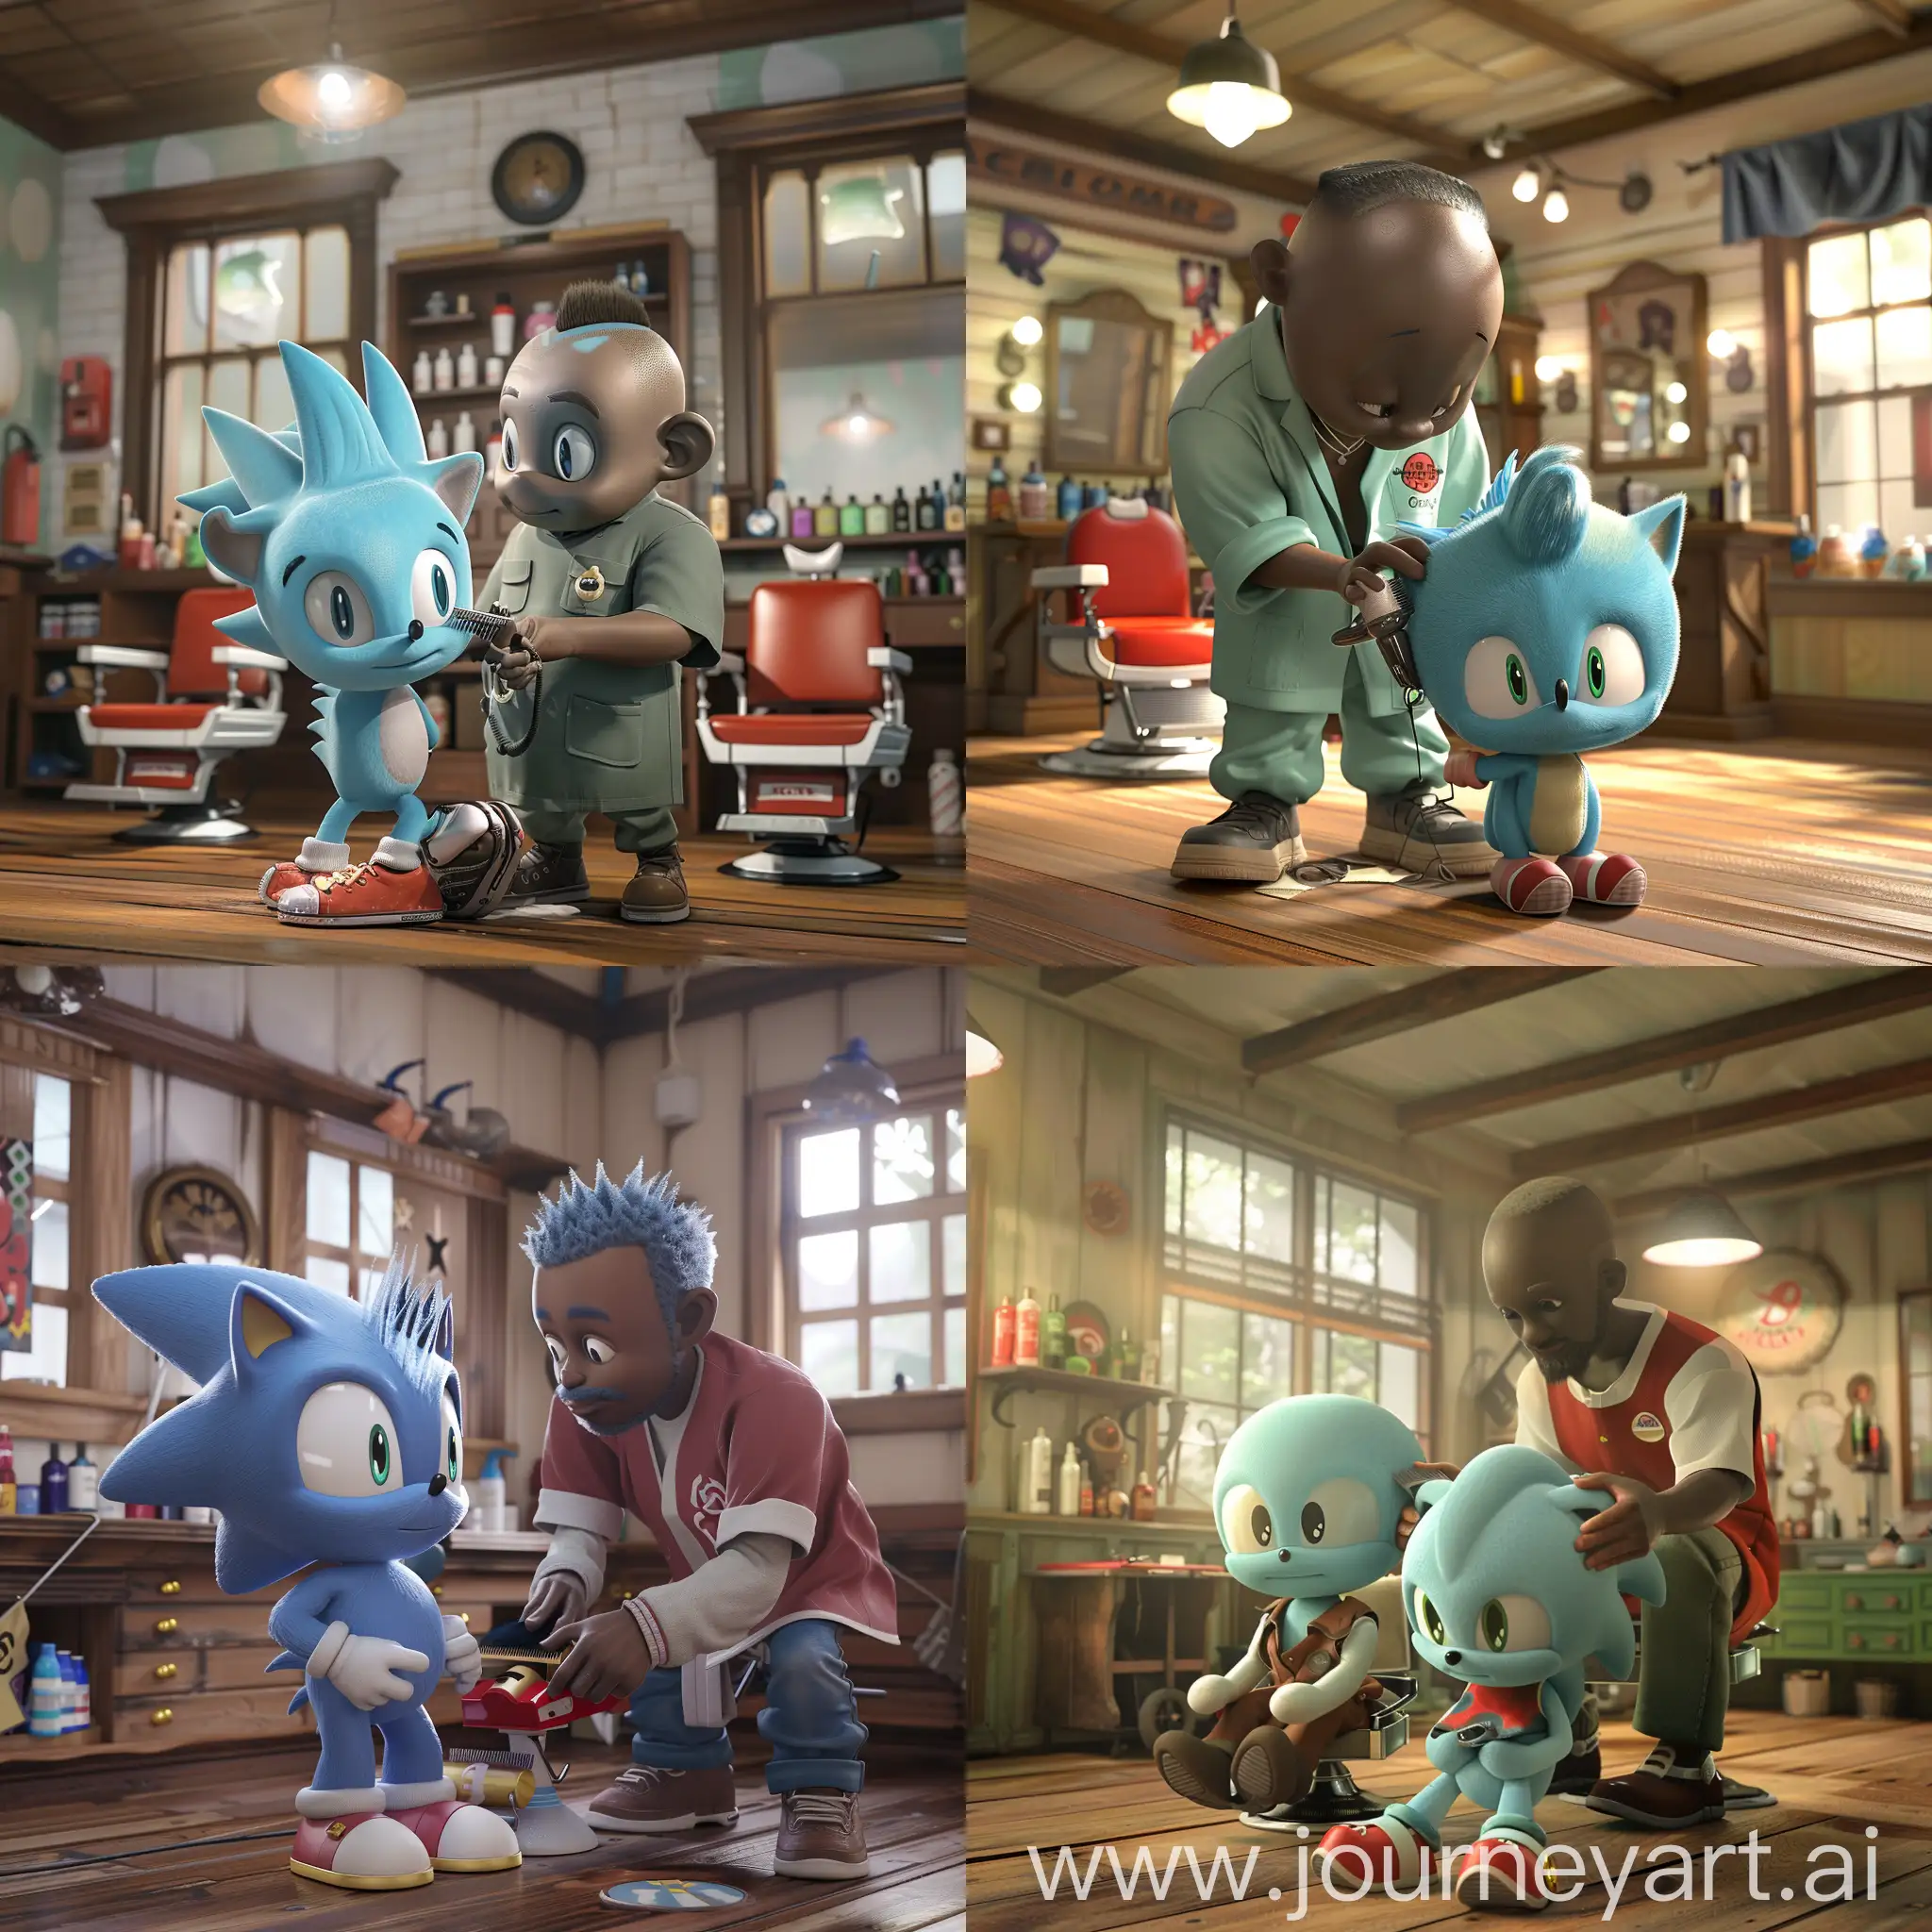 A younger Small blue Chao character from sonic the hedgehog series getting a hair cut in a African American barbershop, with a high top fade, from an older chao character, who seems more experienced